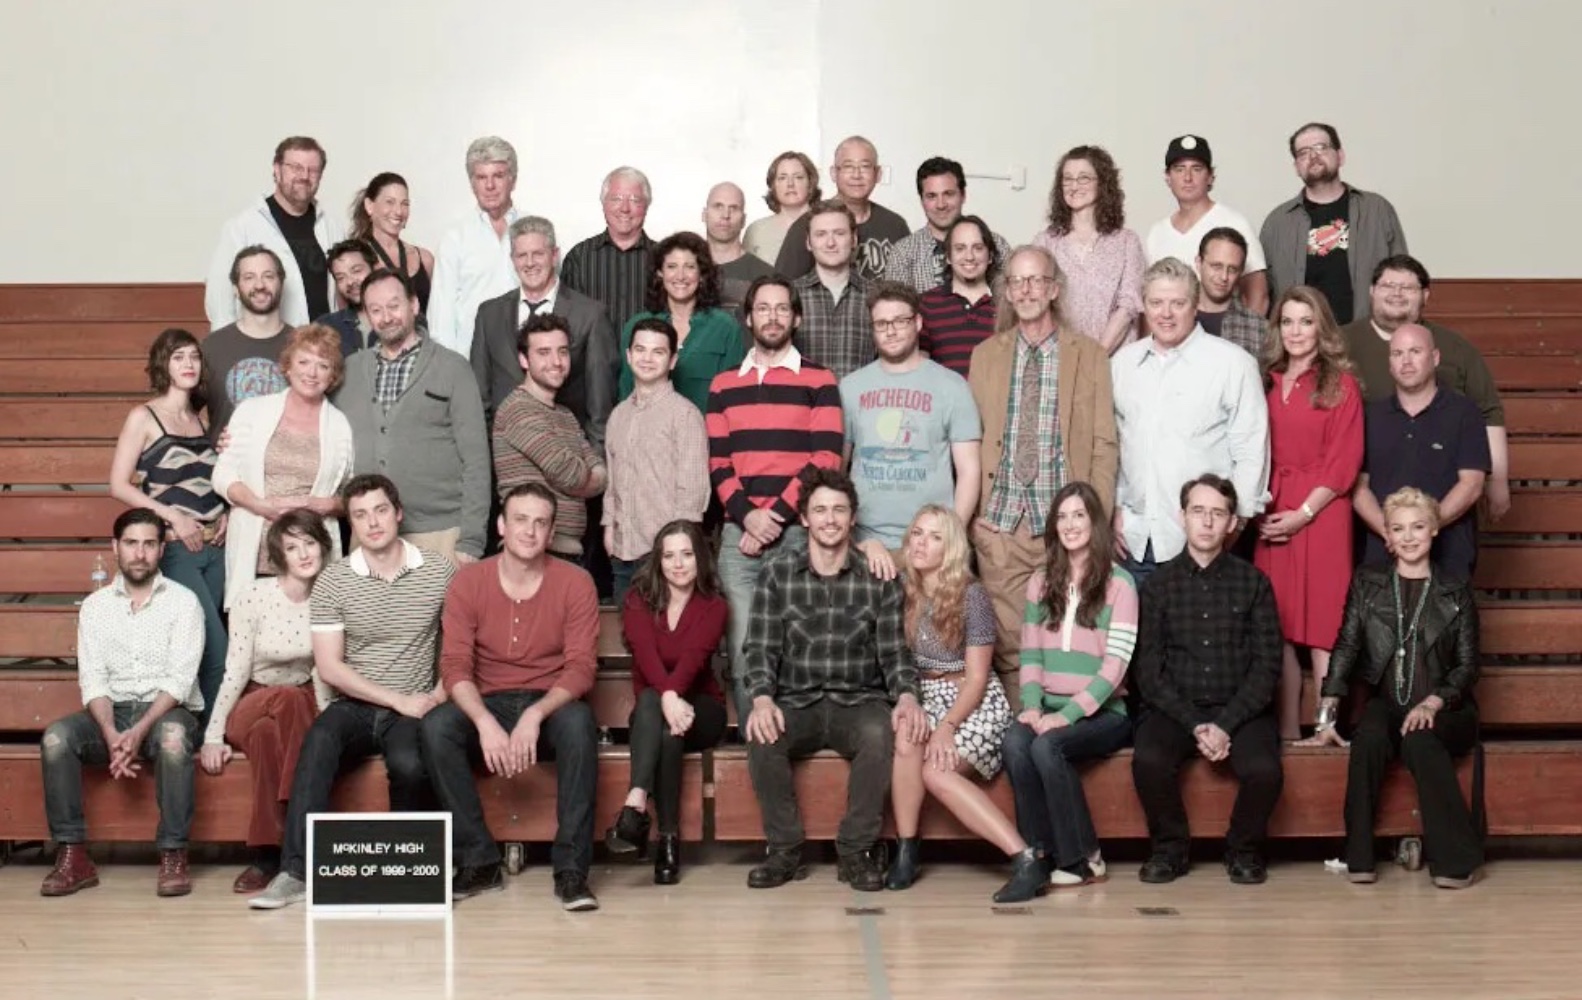 A photo taken of the show's cast and crew during the 2012 Freaks and Geeks Reunion hosted by Vanity Fair.